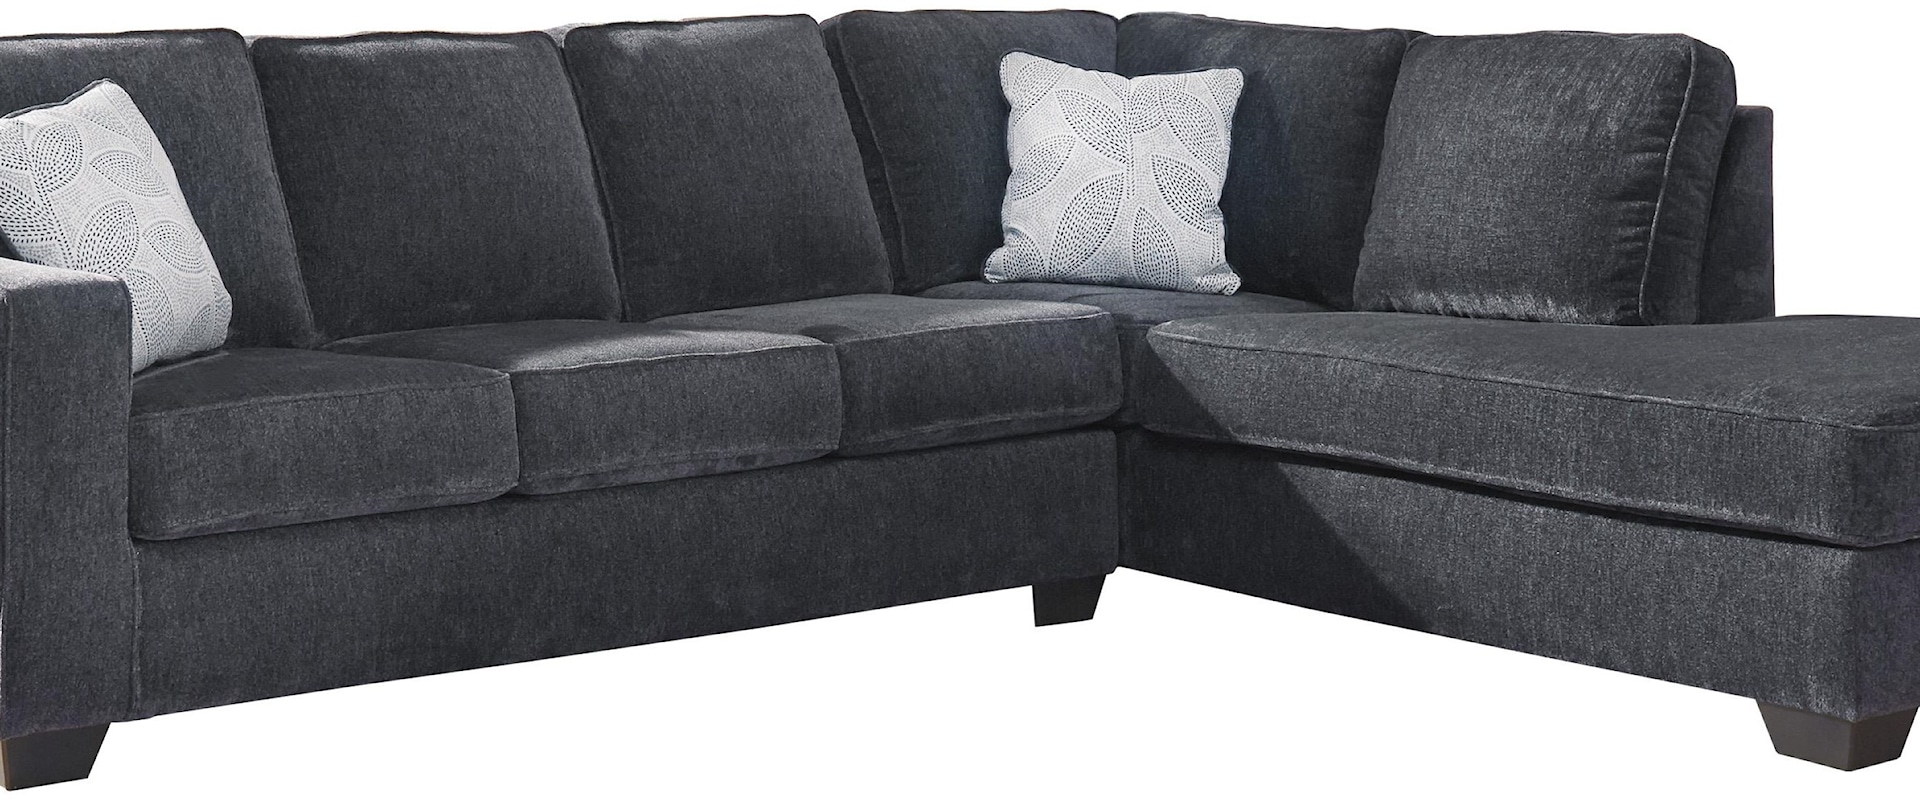 2 Piece Left Arm Facing Sofa, Right Arm Facing Chaise Sectional, Chair and Ottoman Set